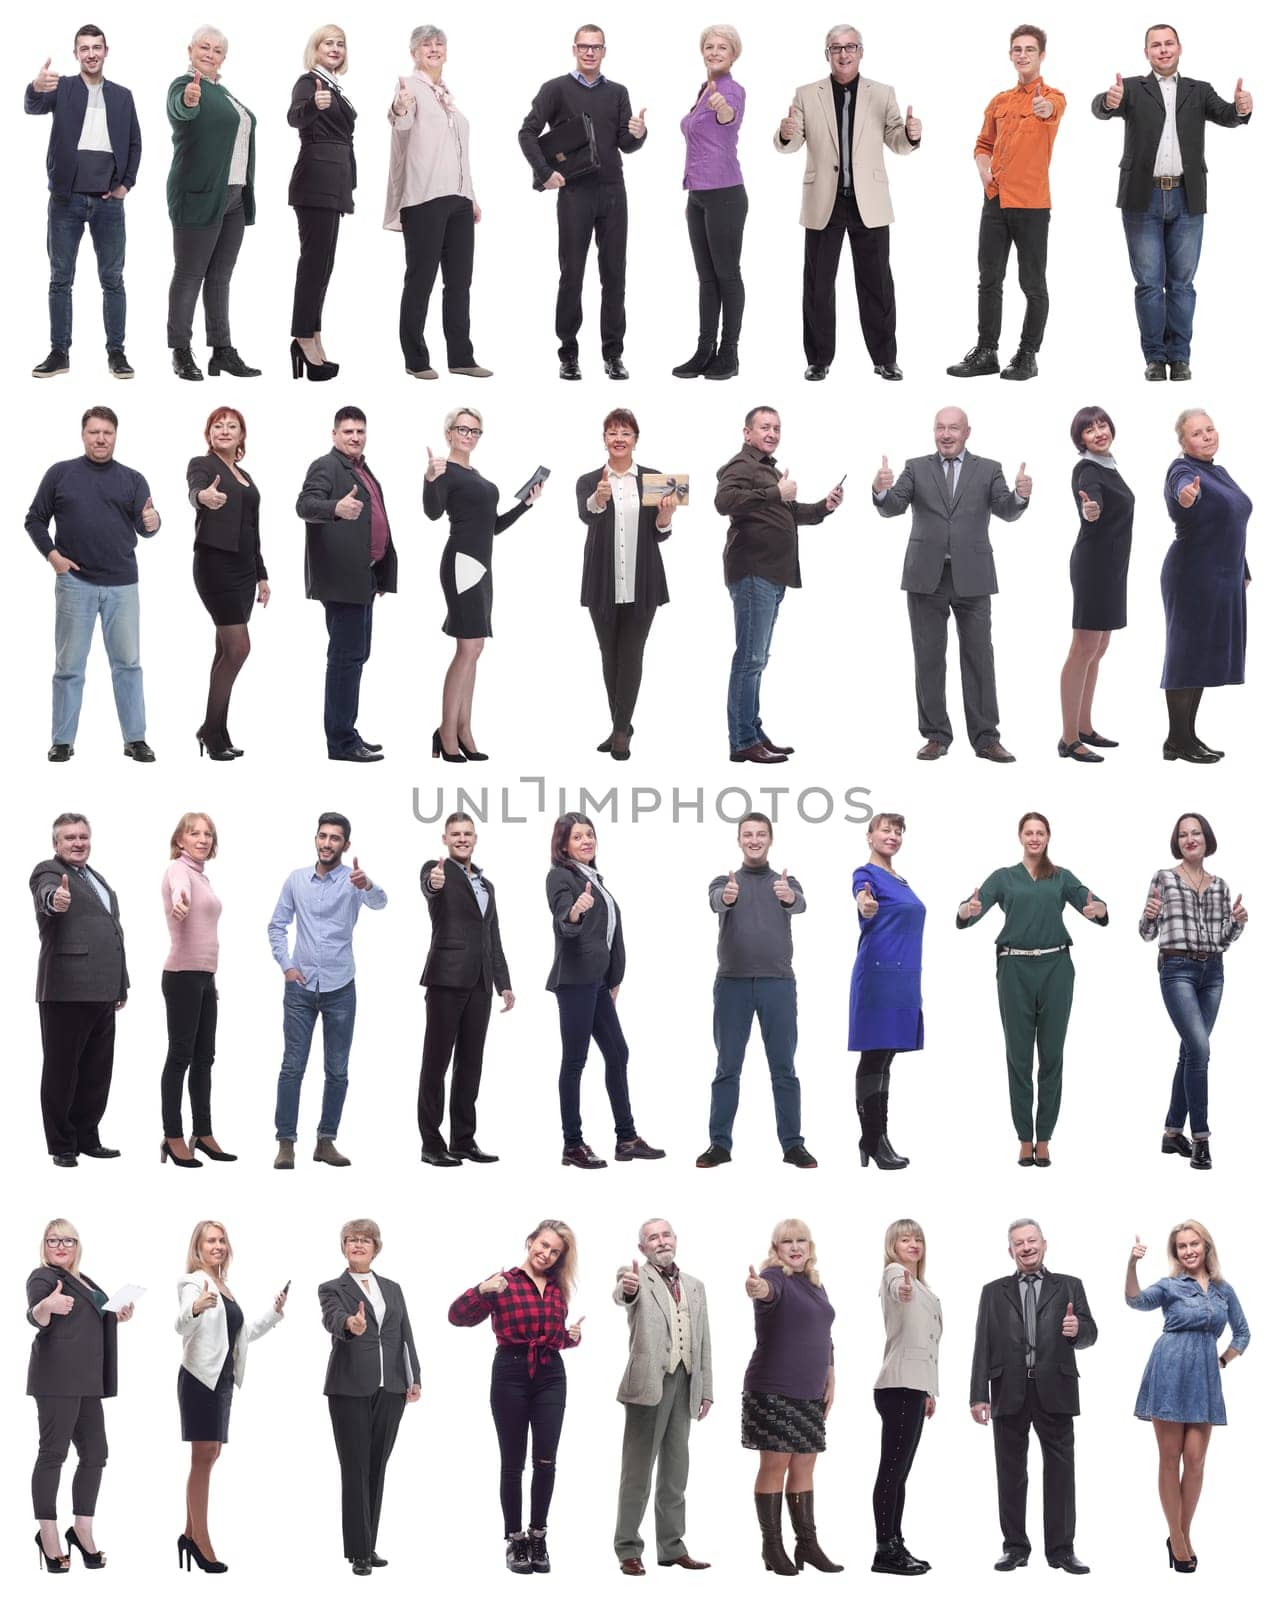 group of business people holding thumb up isolated by asdf